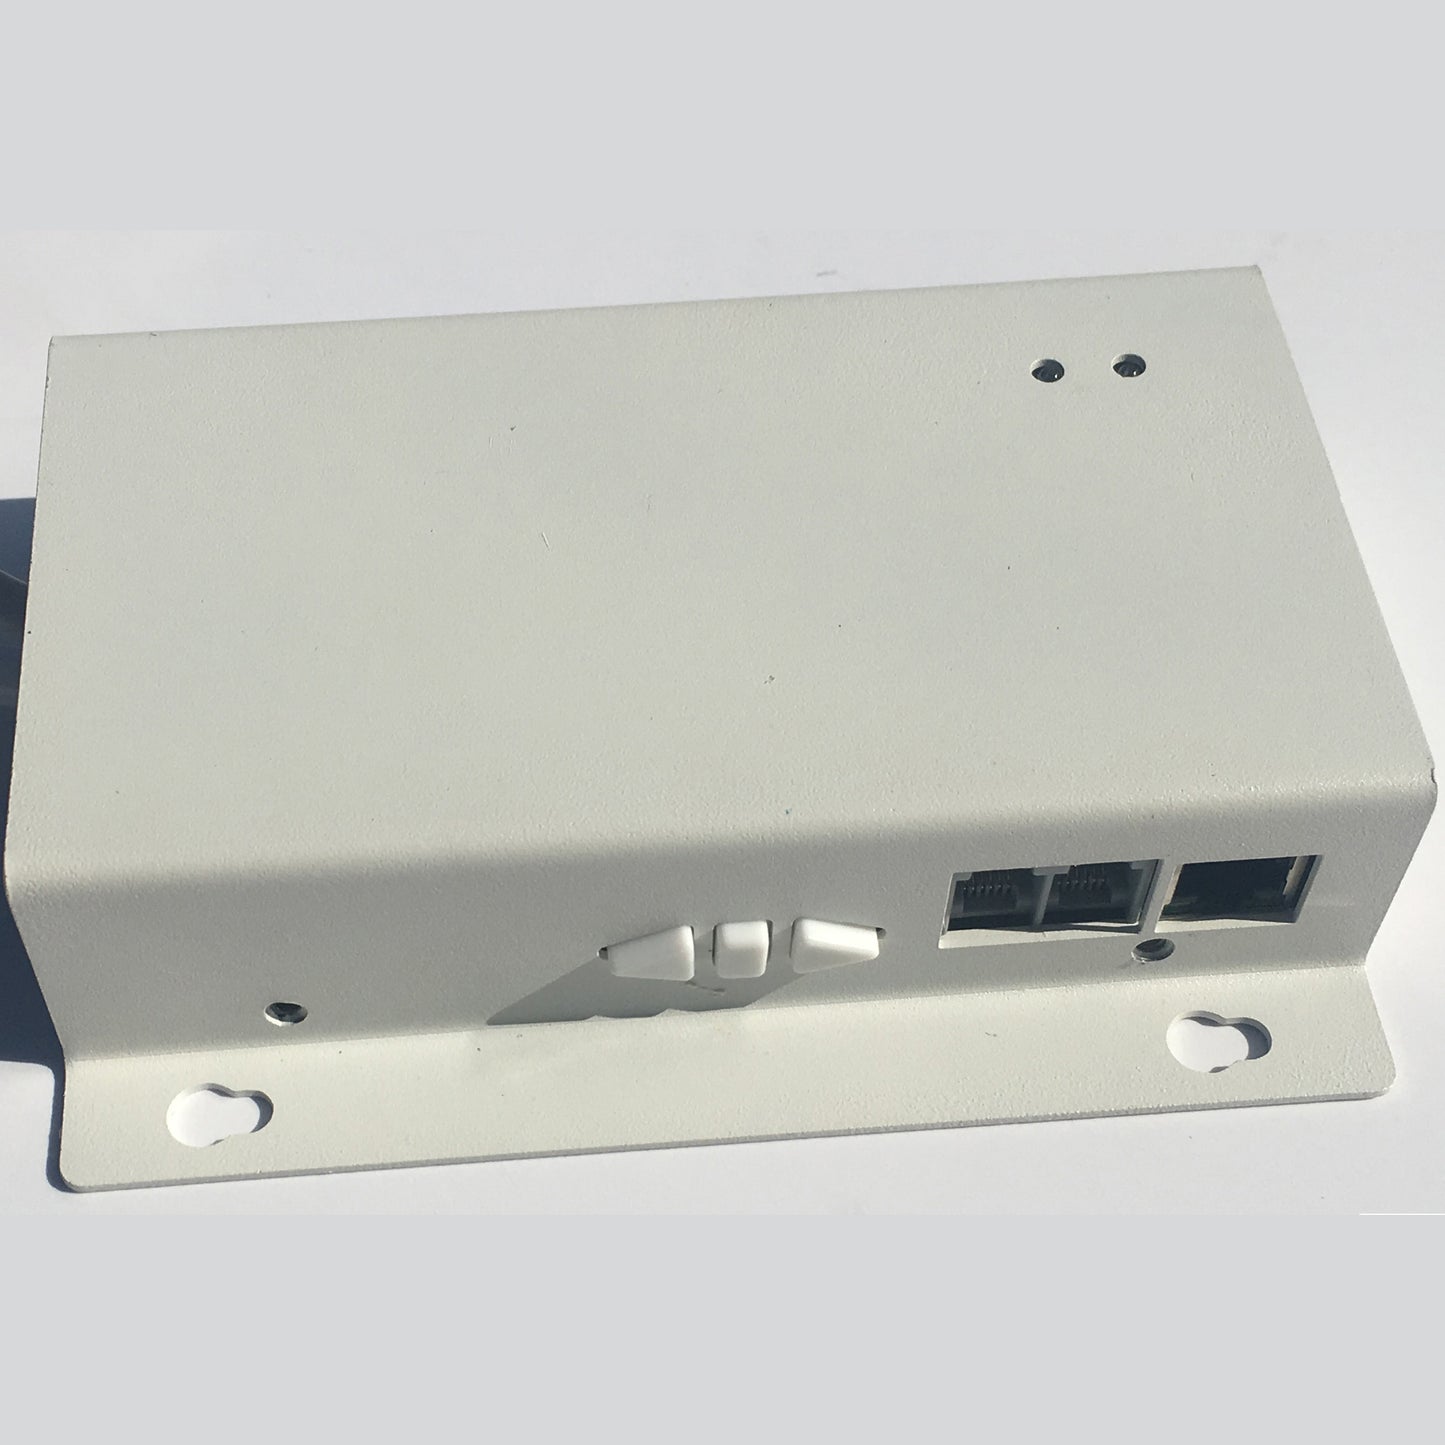 Sapphire IP Control Box - Compatible with many new control systems